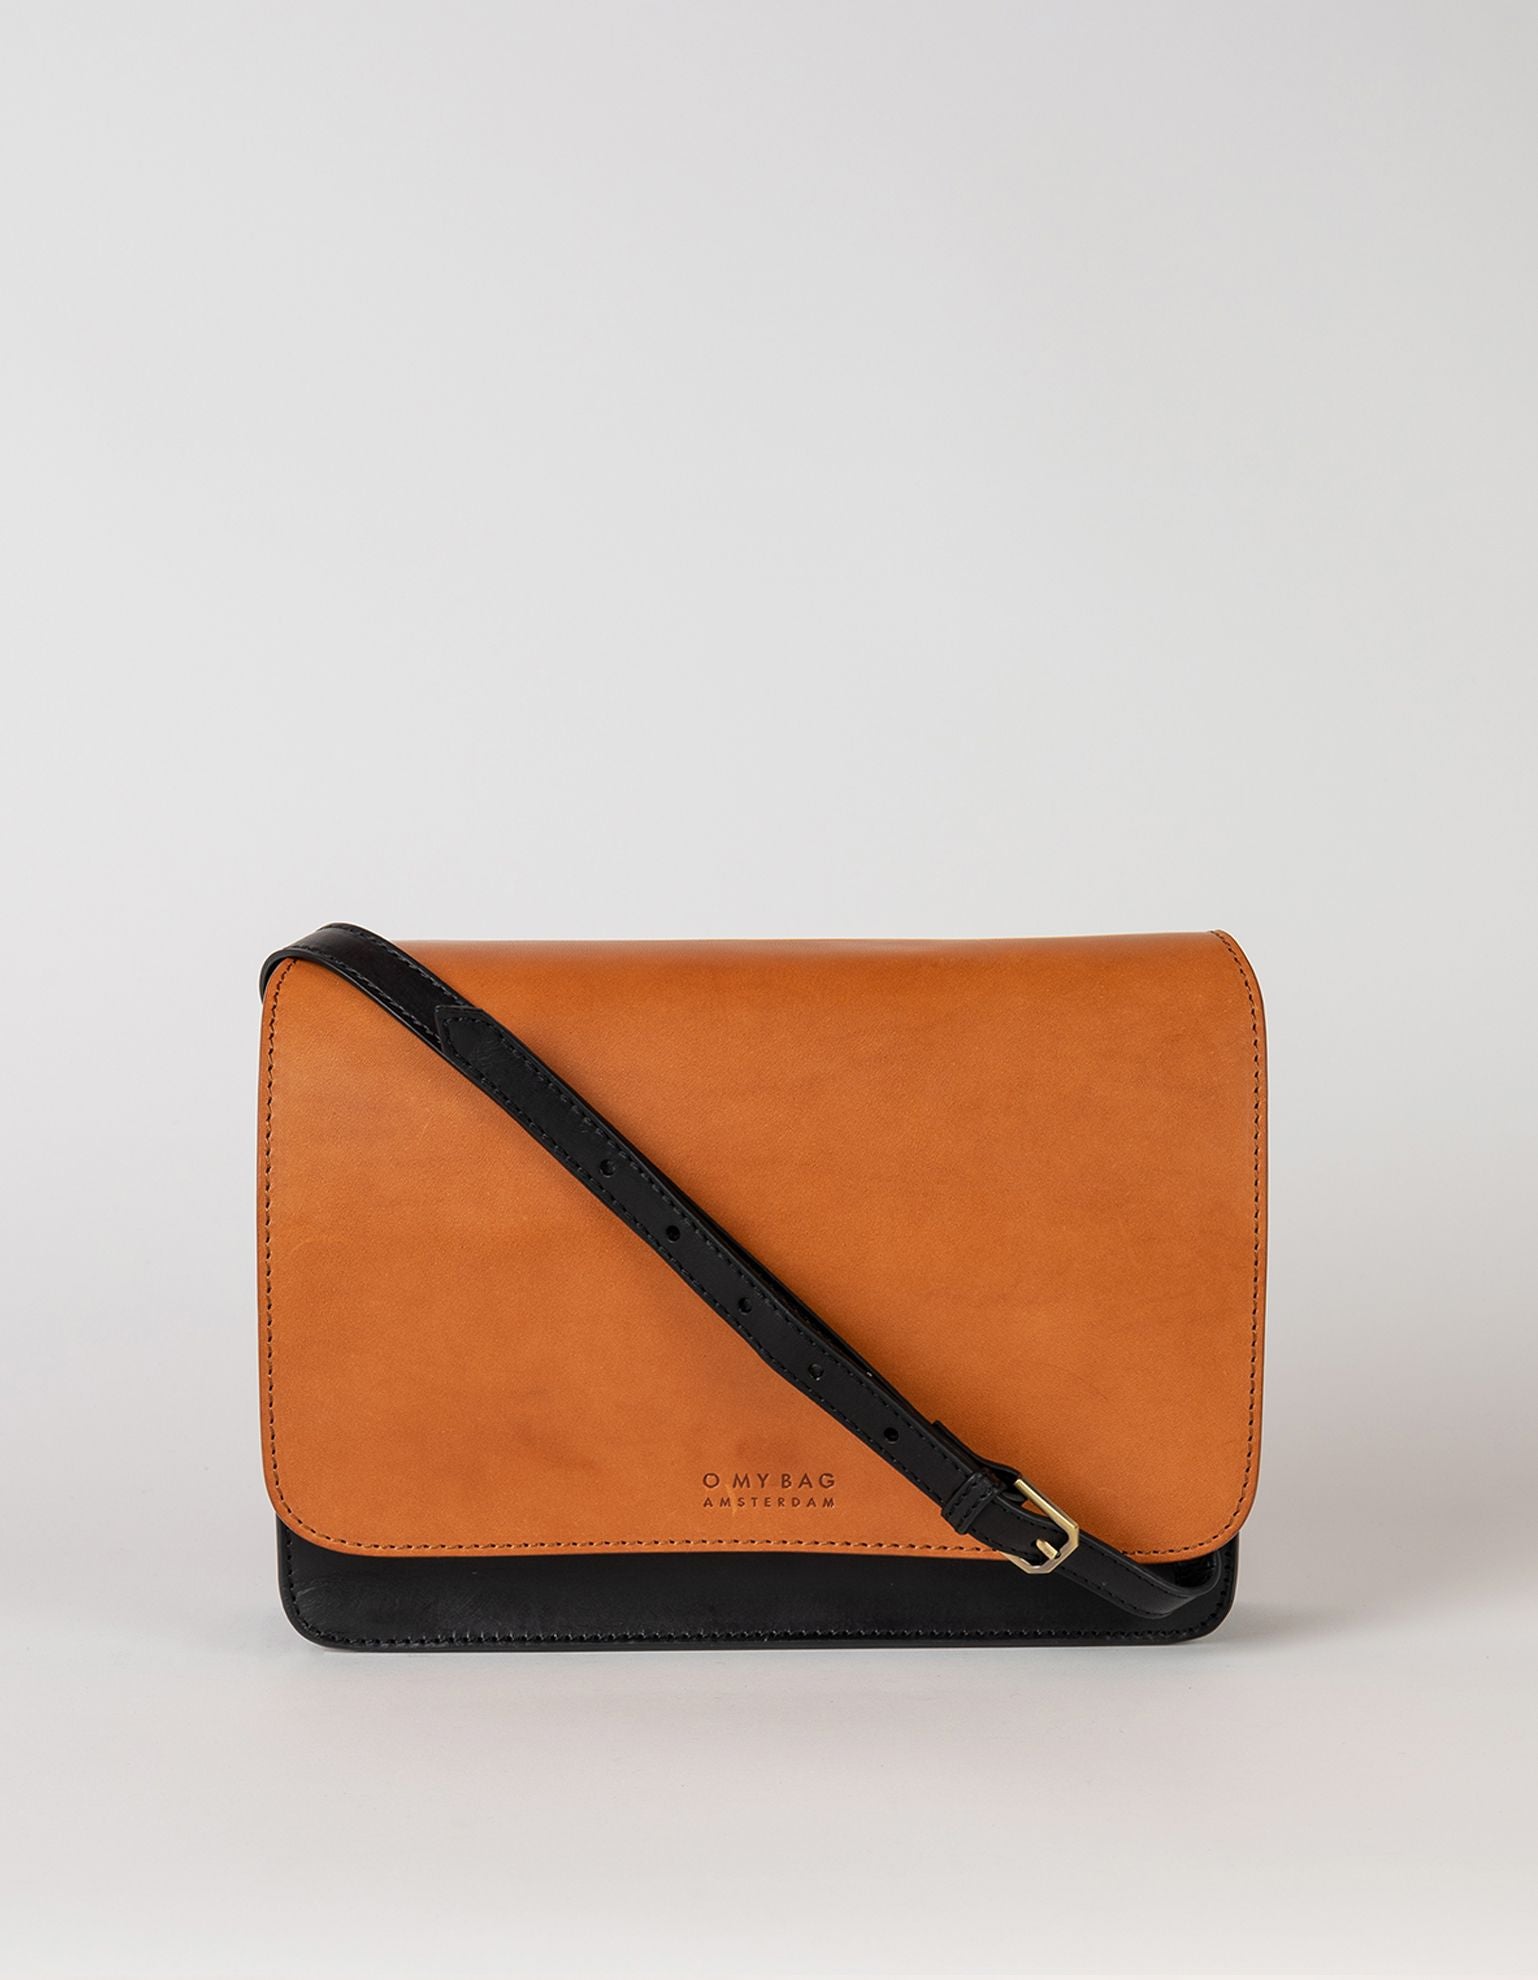 Audrey - black & cognac classic leather bag, front image with leather strap